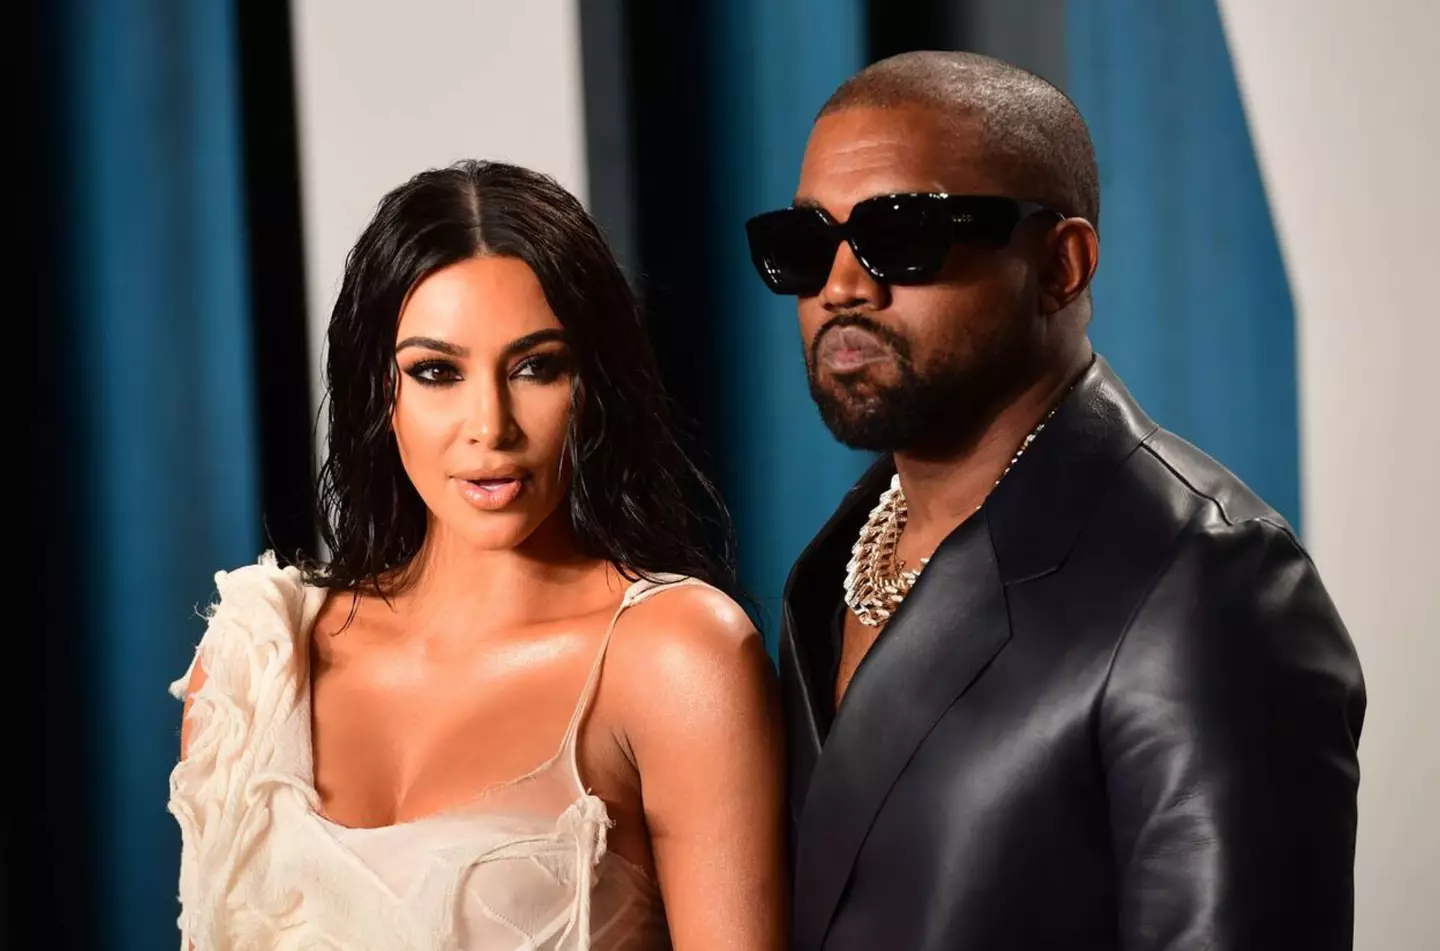 Kim Kardashian and Kanye West were married for eight years.